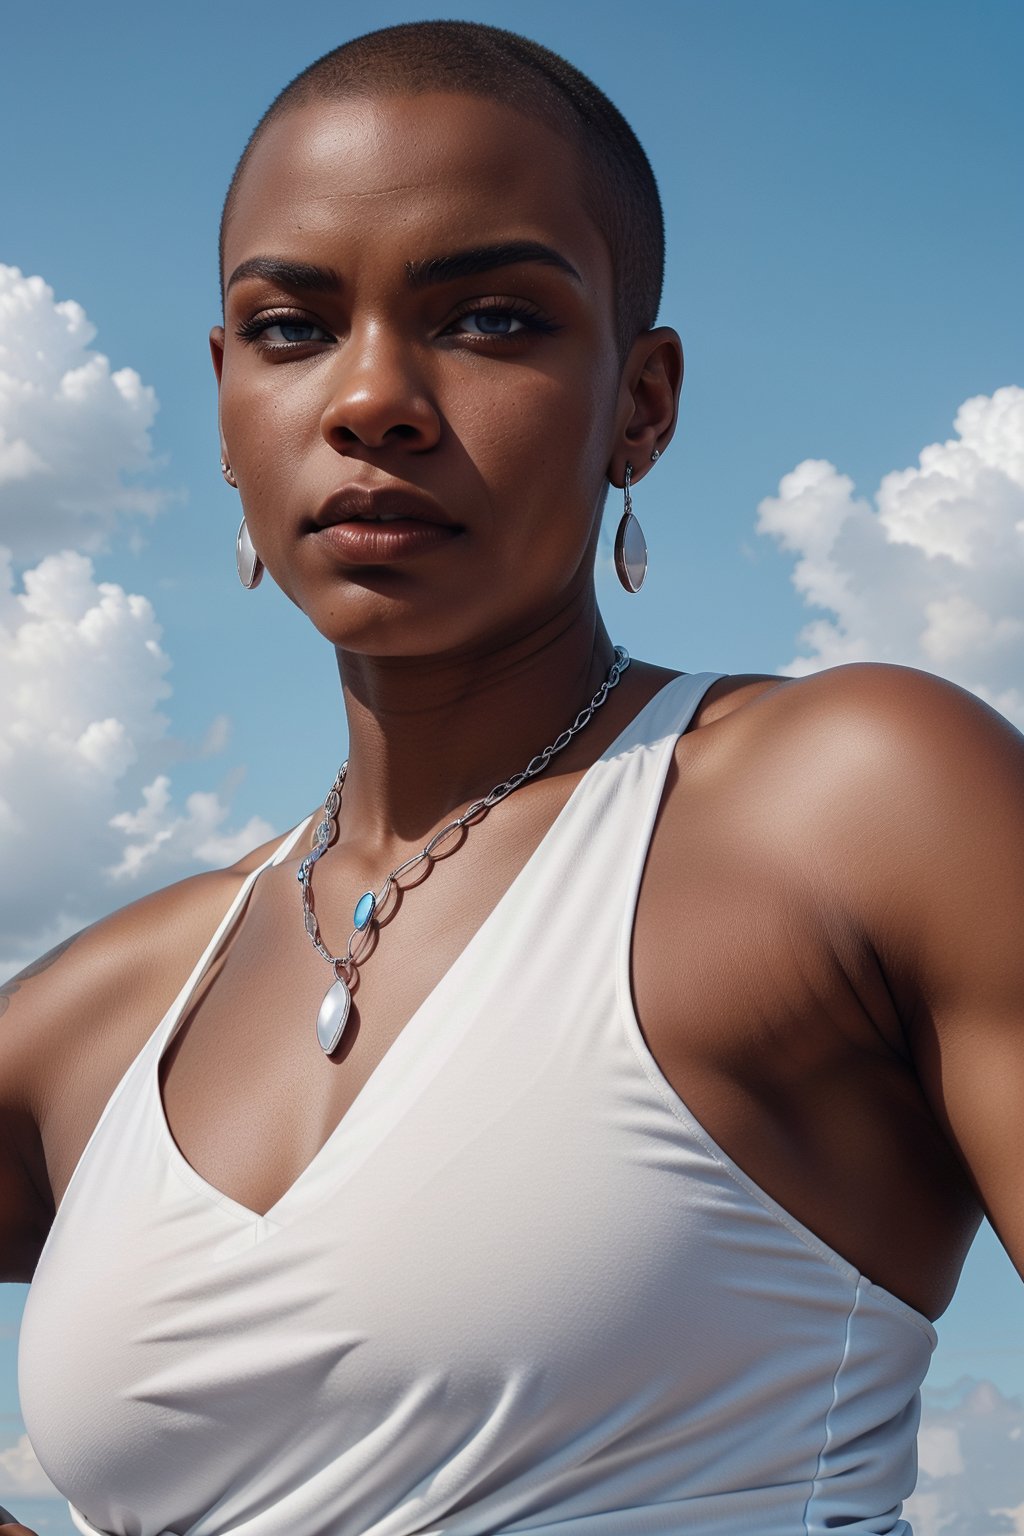 Black woman with a shaved head and piercing blue eyes, wearing a bold, asymmetrical red dress with a chunky silver necklace, strikes a powerful pose, arm raised with a slight bend at the elbow, showcasing her strength and determination against a backdrop of fluffy white clouds and a bright blue sky.